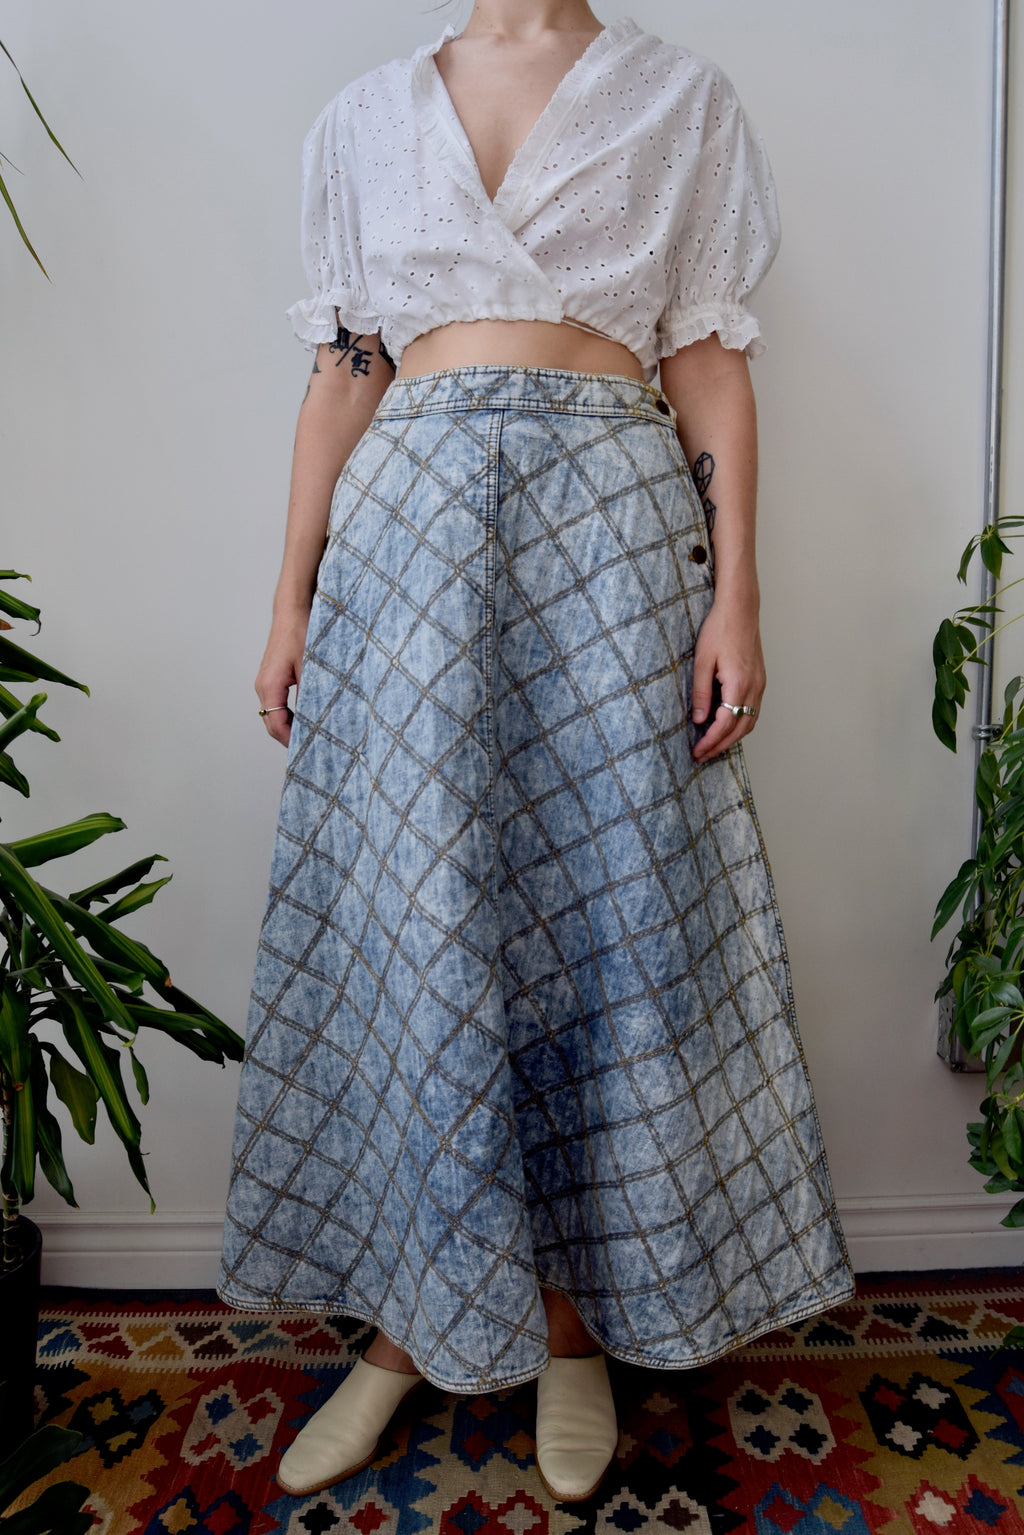 Perry Ellis Quilted Maxi Skirt